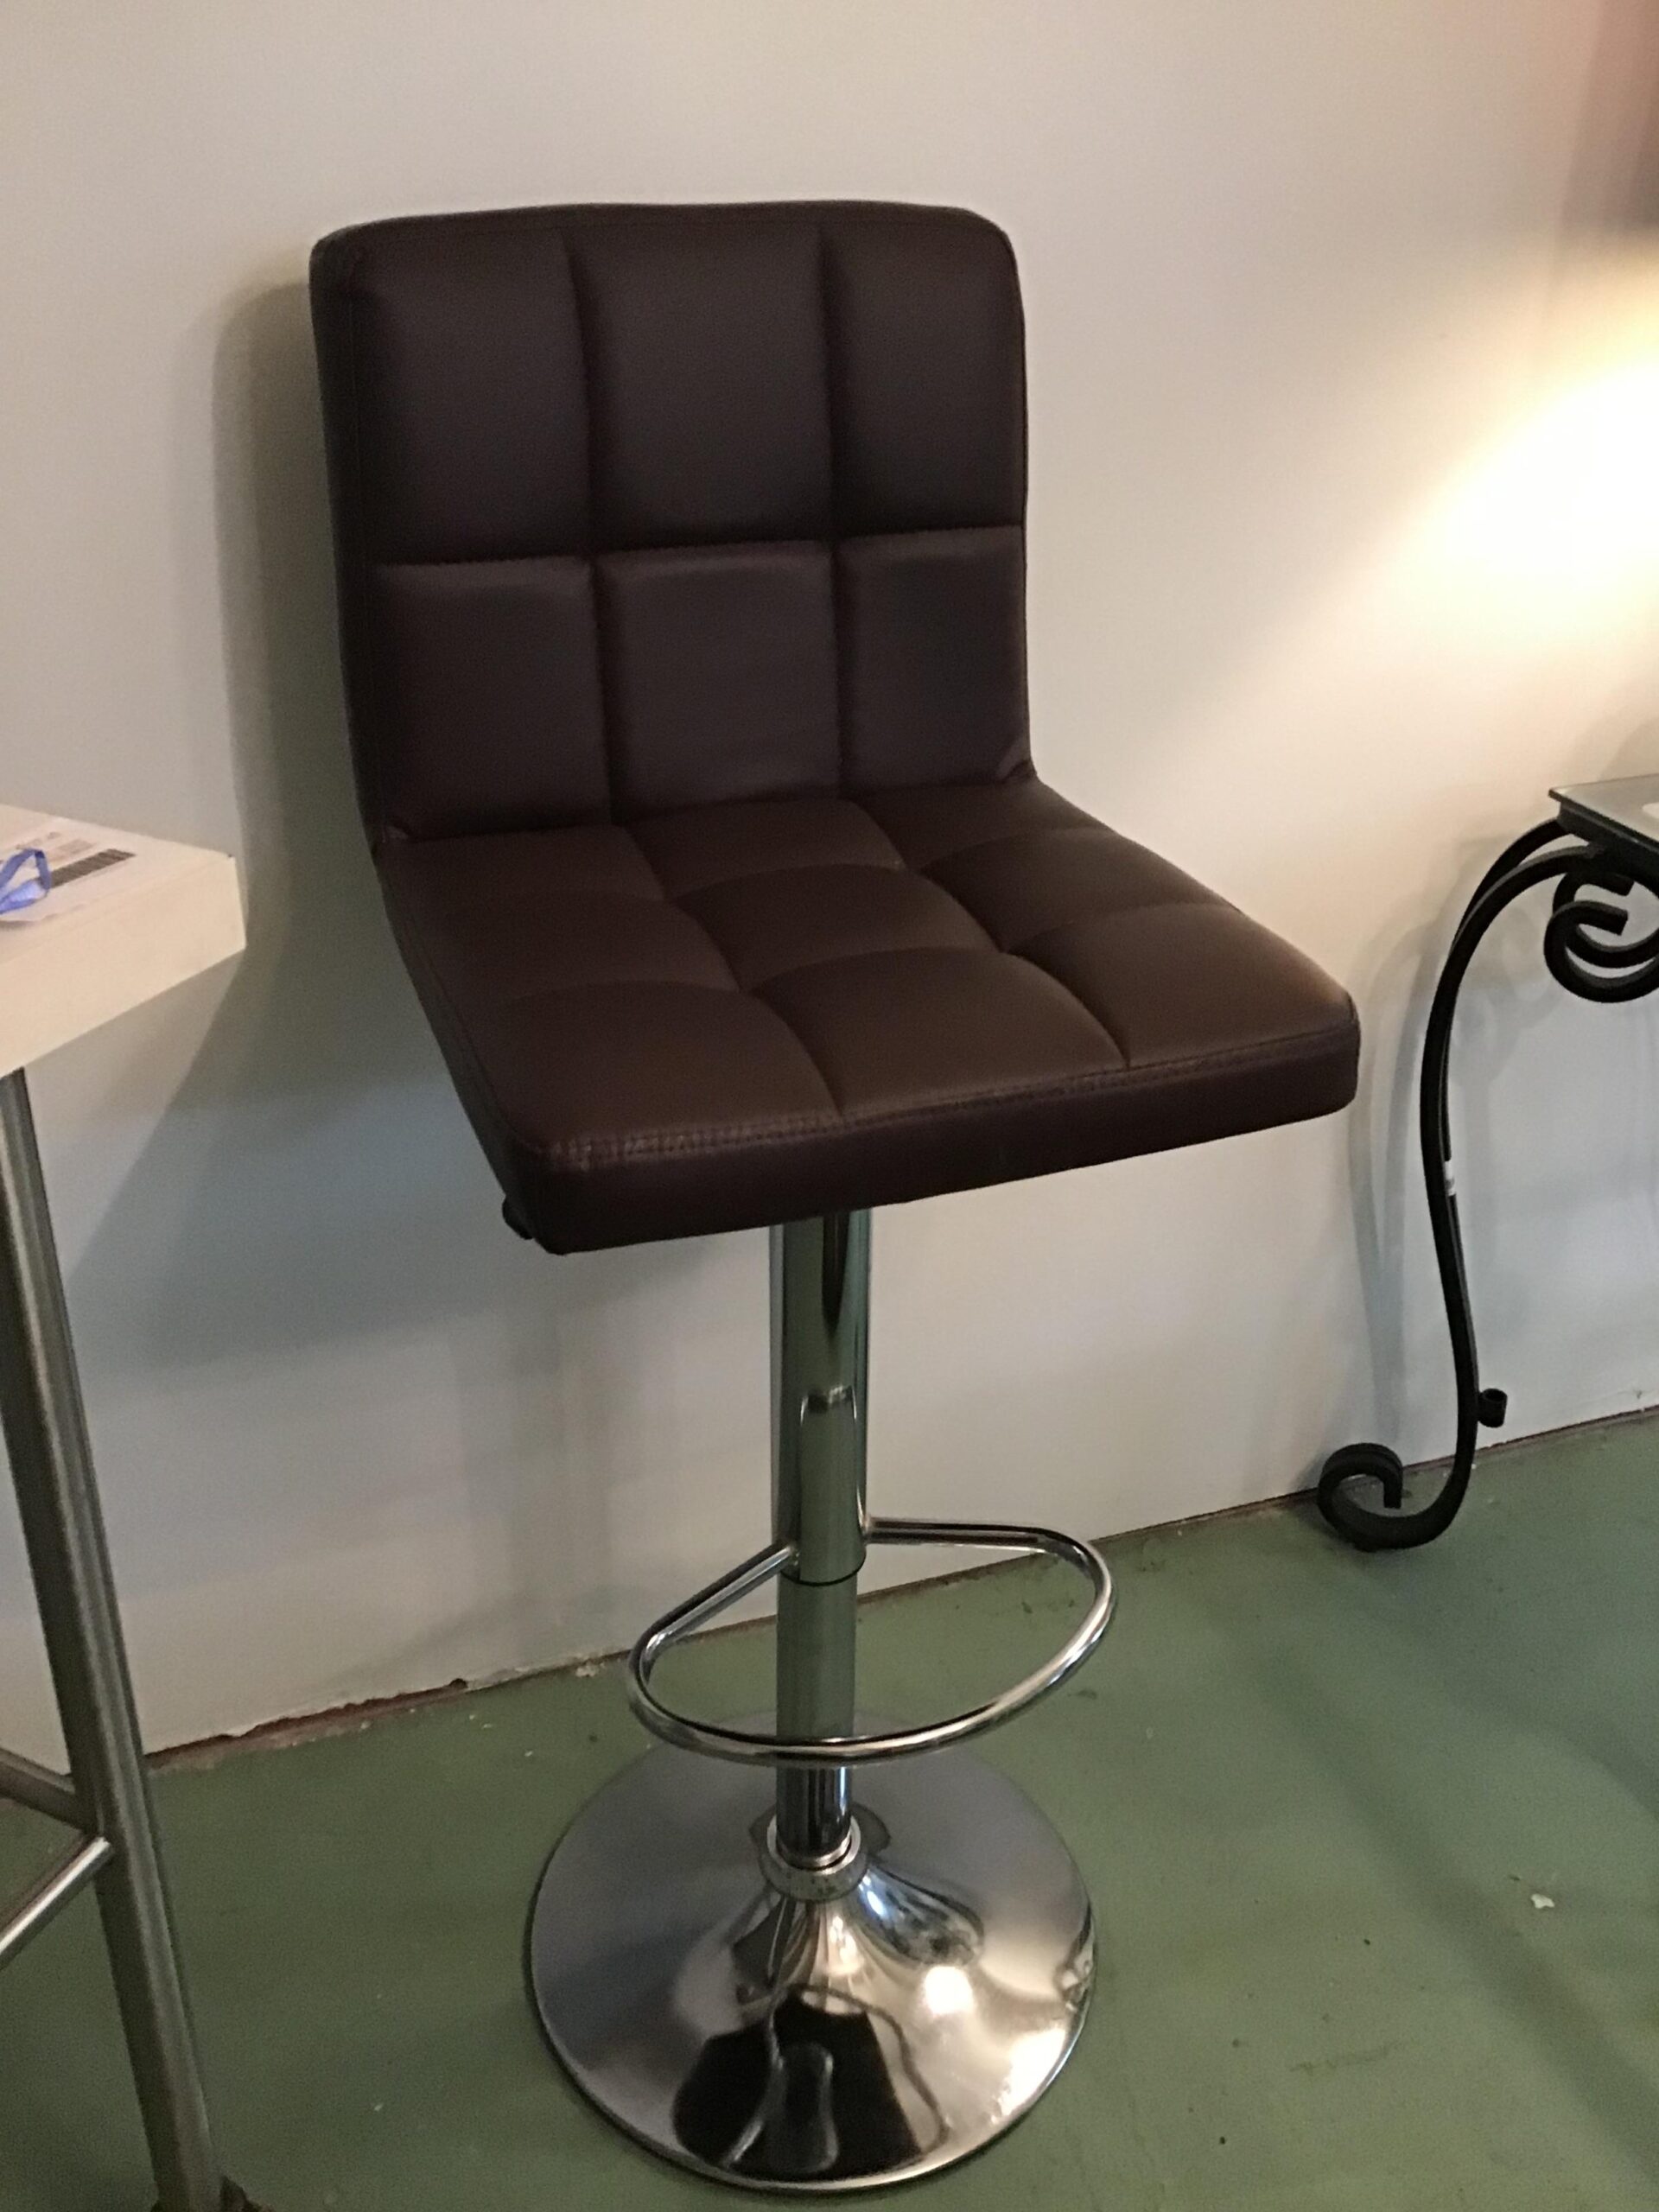 Adjustable Faux Leather Swivel Bar Stool  NEW PRICE $30.00